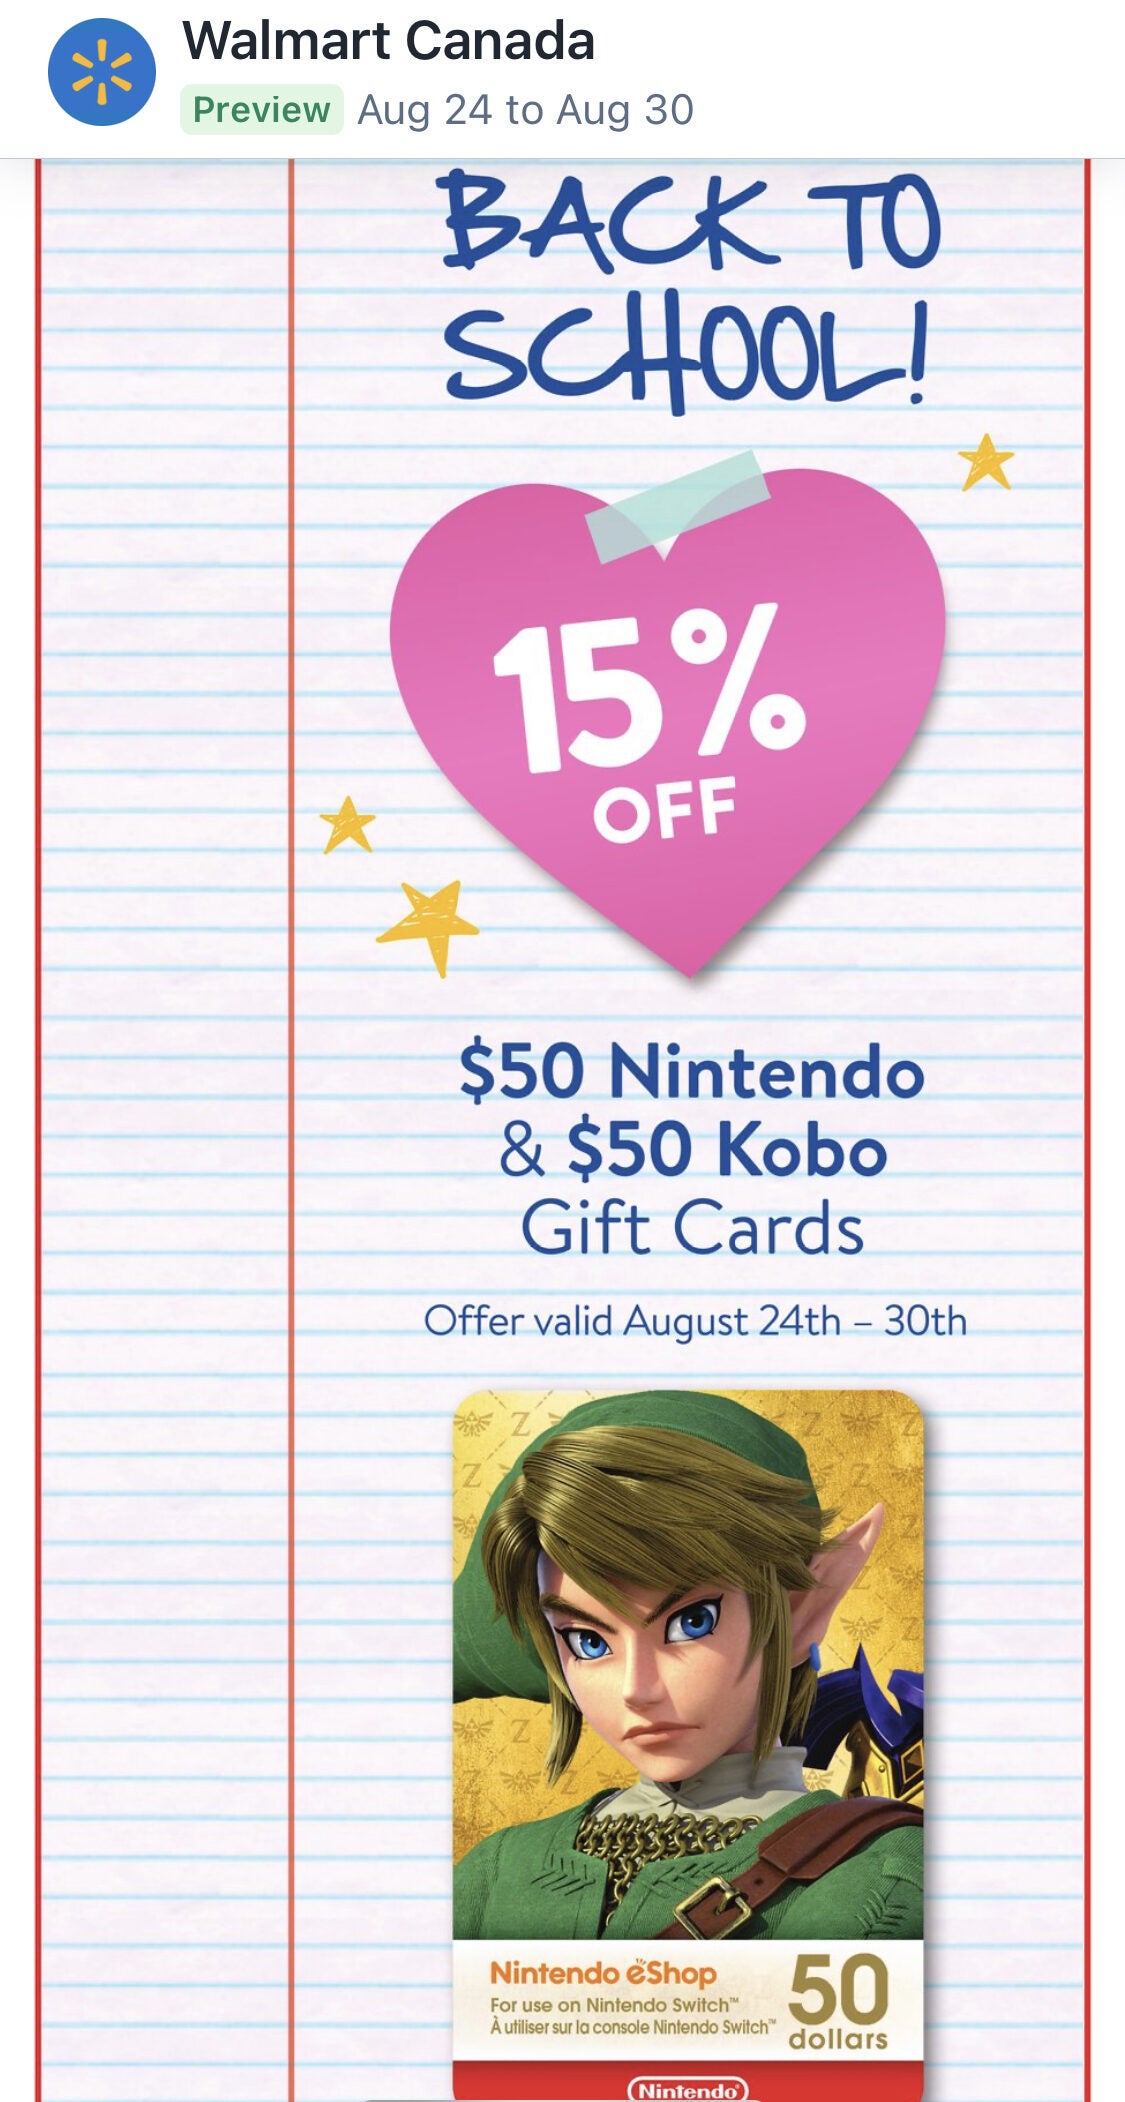 Fry's / USA] Nintendo eShop card - $50 credit for $40  $10 off w/ Promo  Code (2.2.19 ONLY) : r/NintendoSwitchDeals